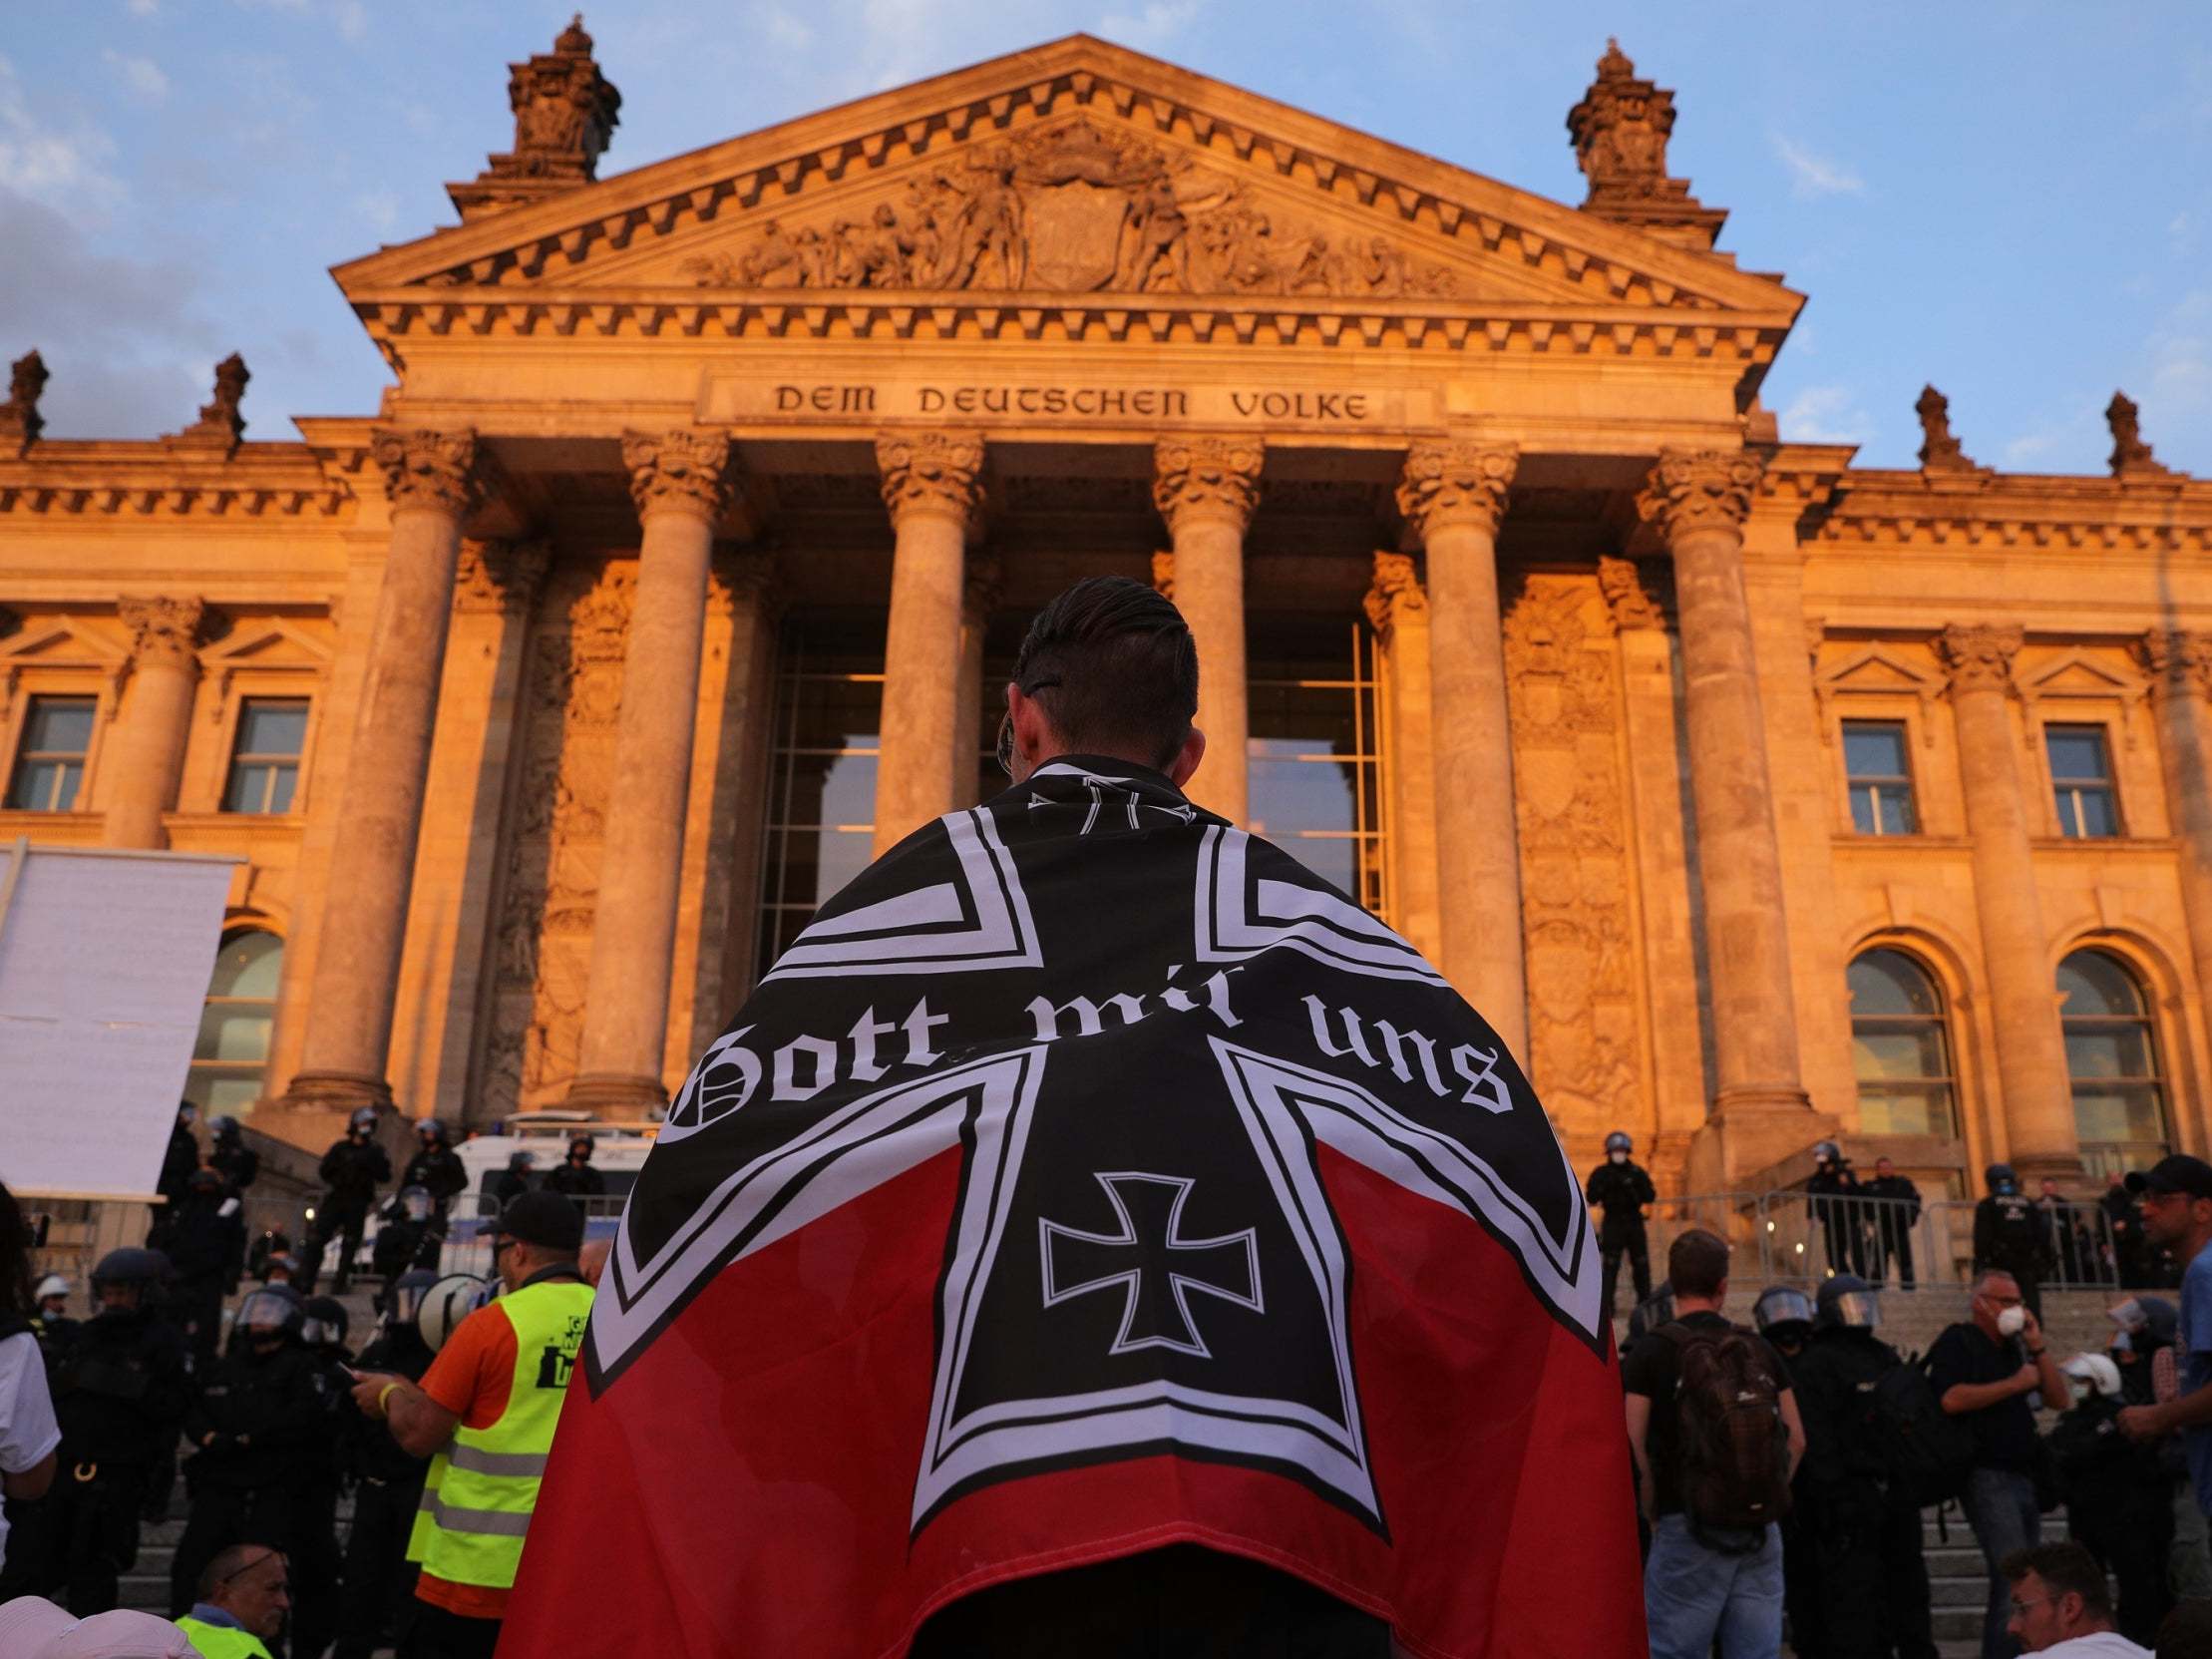 A protester wrapped in an imperial German flag.